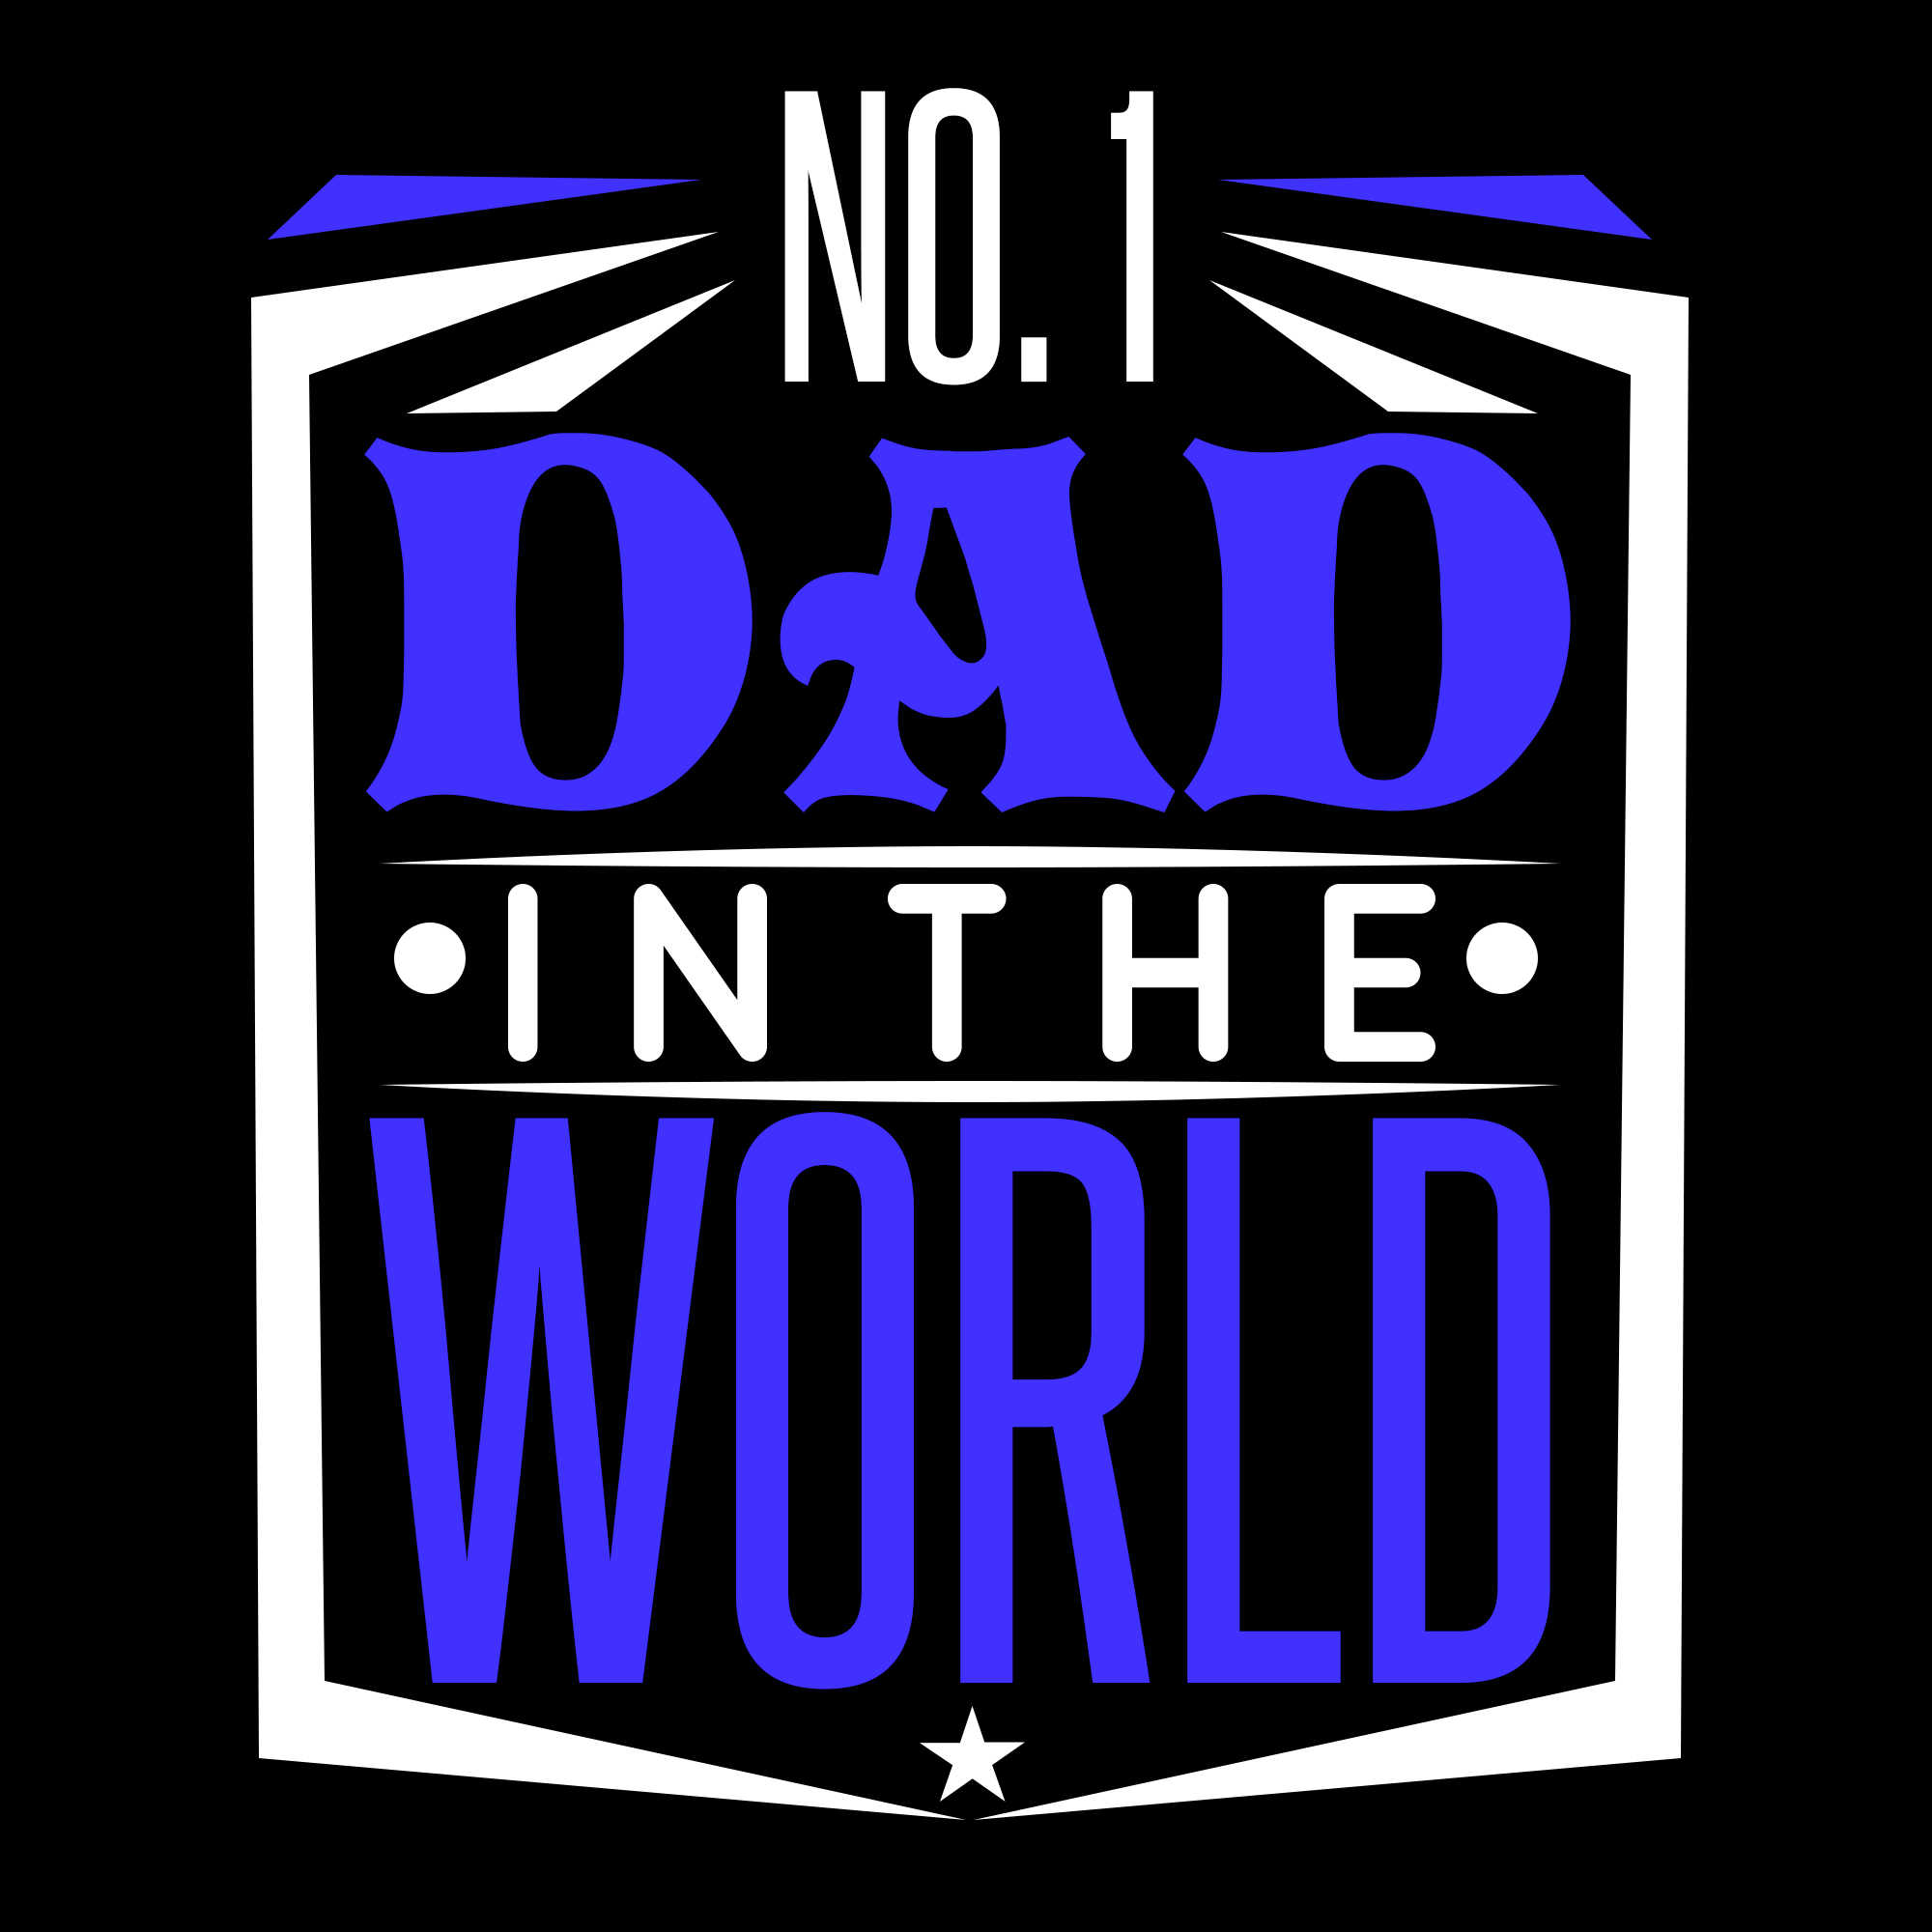 Download Number 1 Dad In The World - Download Free Vectors, Clipart ...